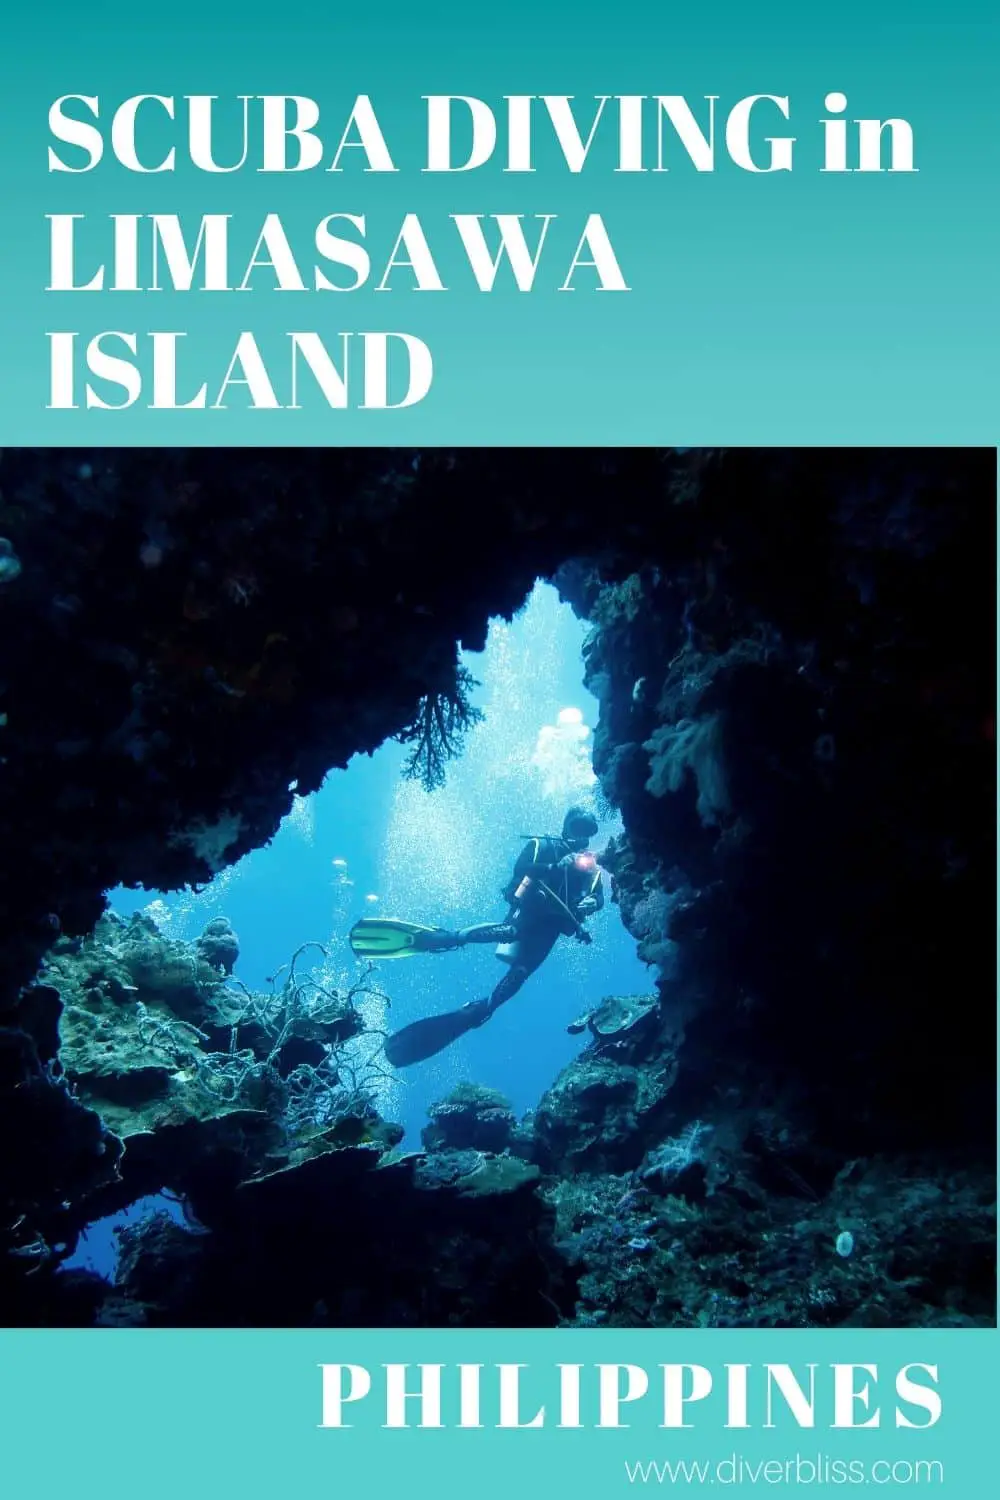 scuba diving in limasawa island philippines